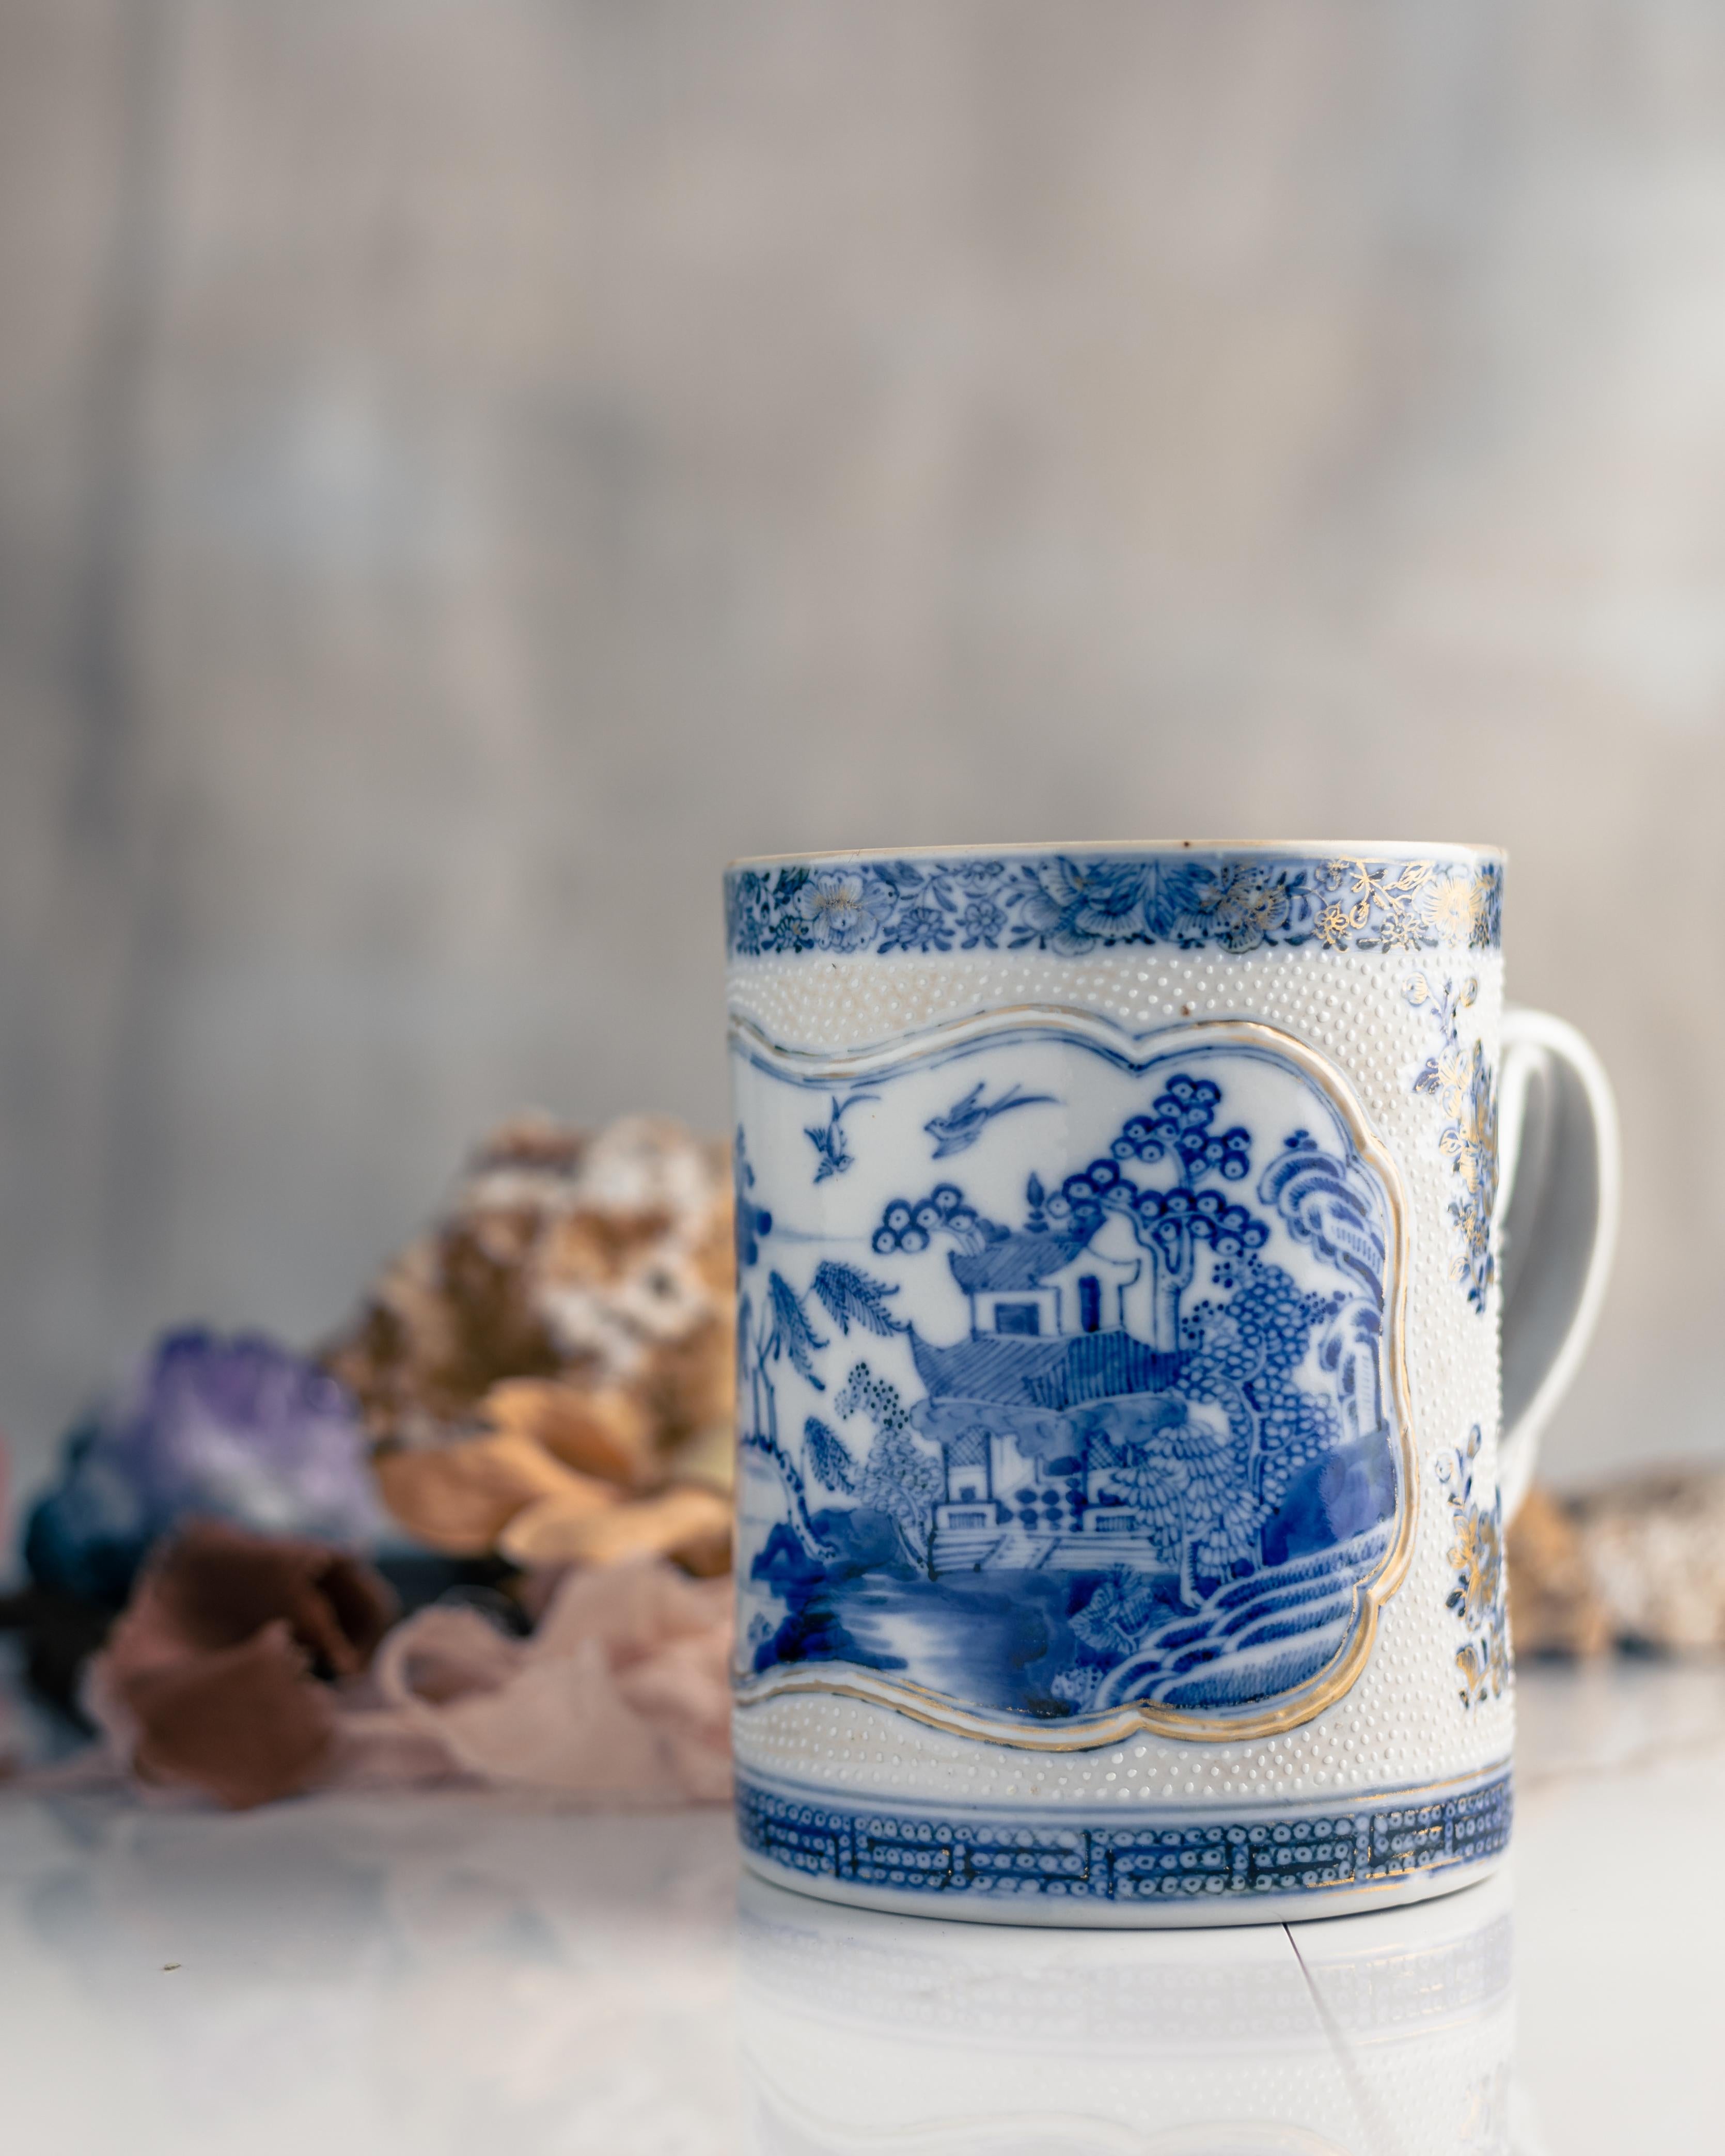 A large blue and white Chinese export porcelain mug, made during the Qianlong Period circa 1775.

This Chinese export porcelain mug is beautifully painted in cobalt blue glaze. The central design shows a Chinese landscape with a lone fisherman in